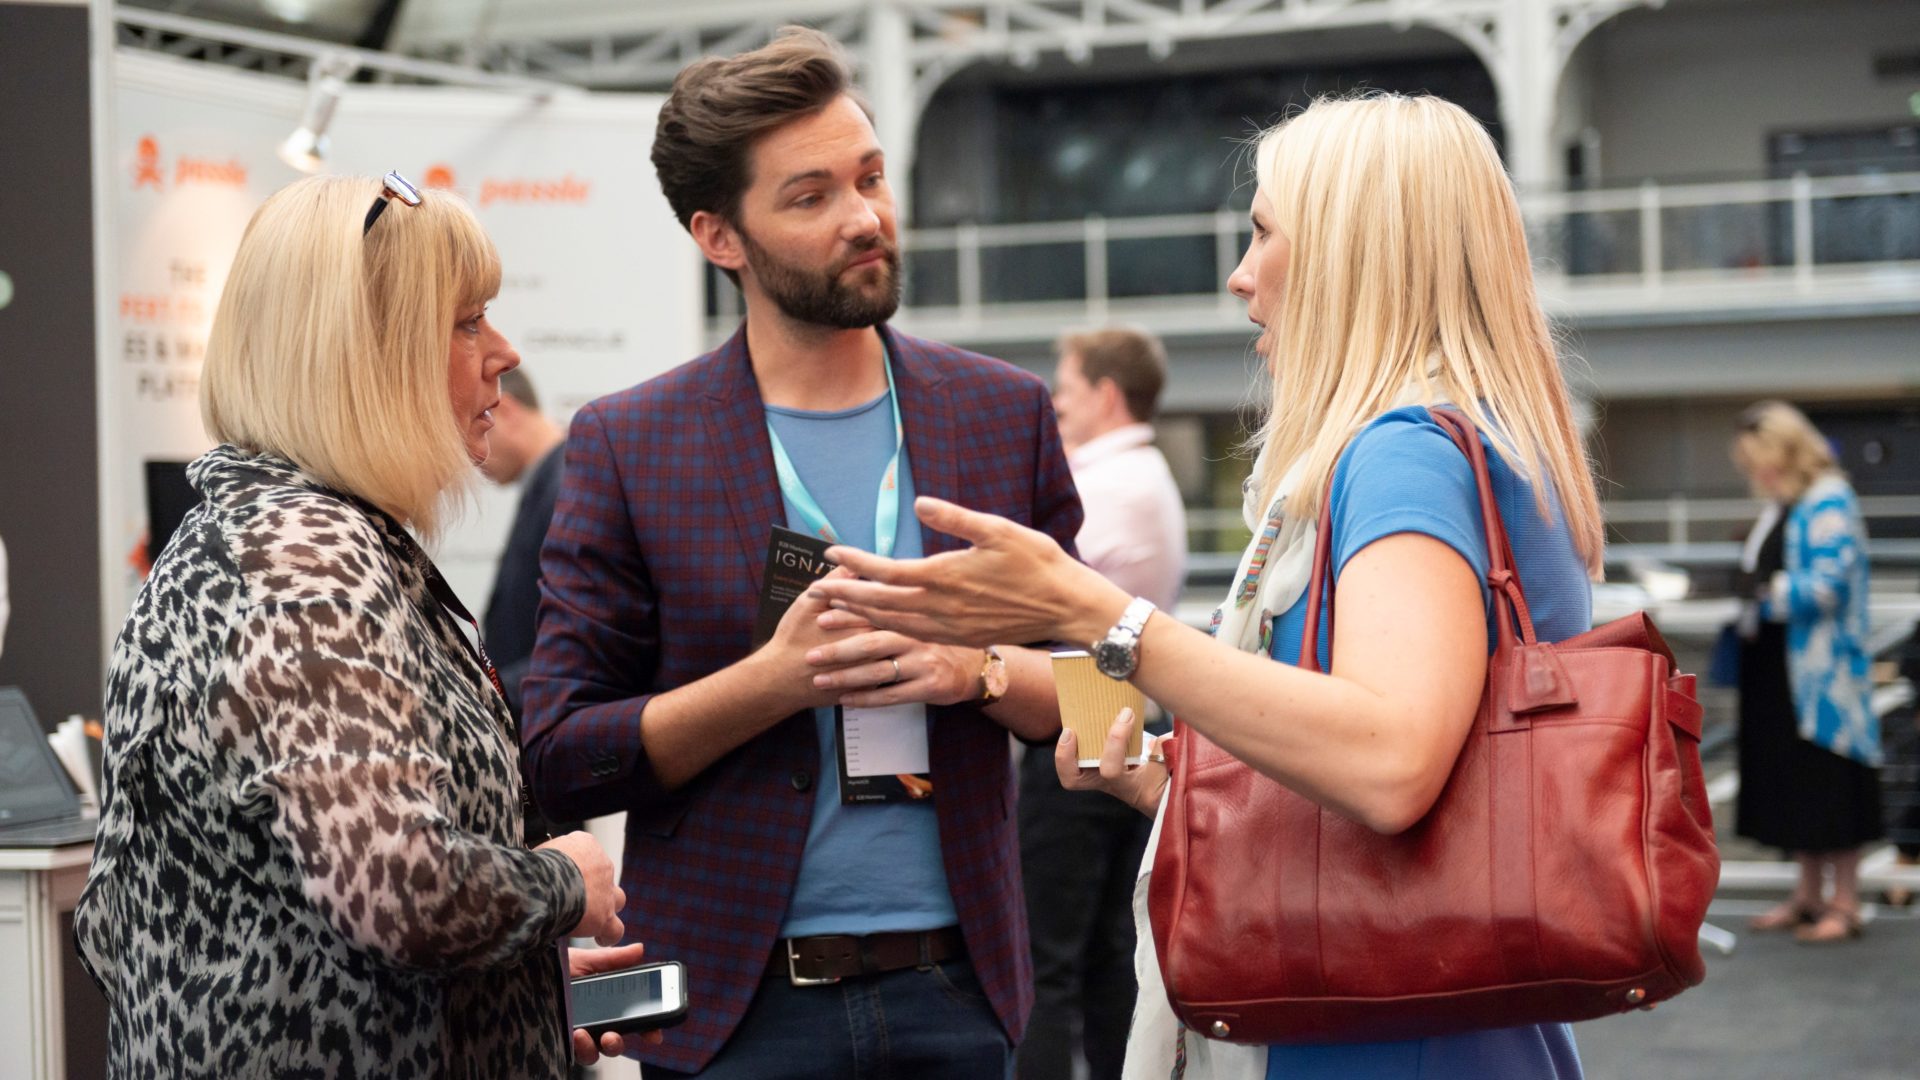 Three people conversing at a marketing event.